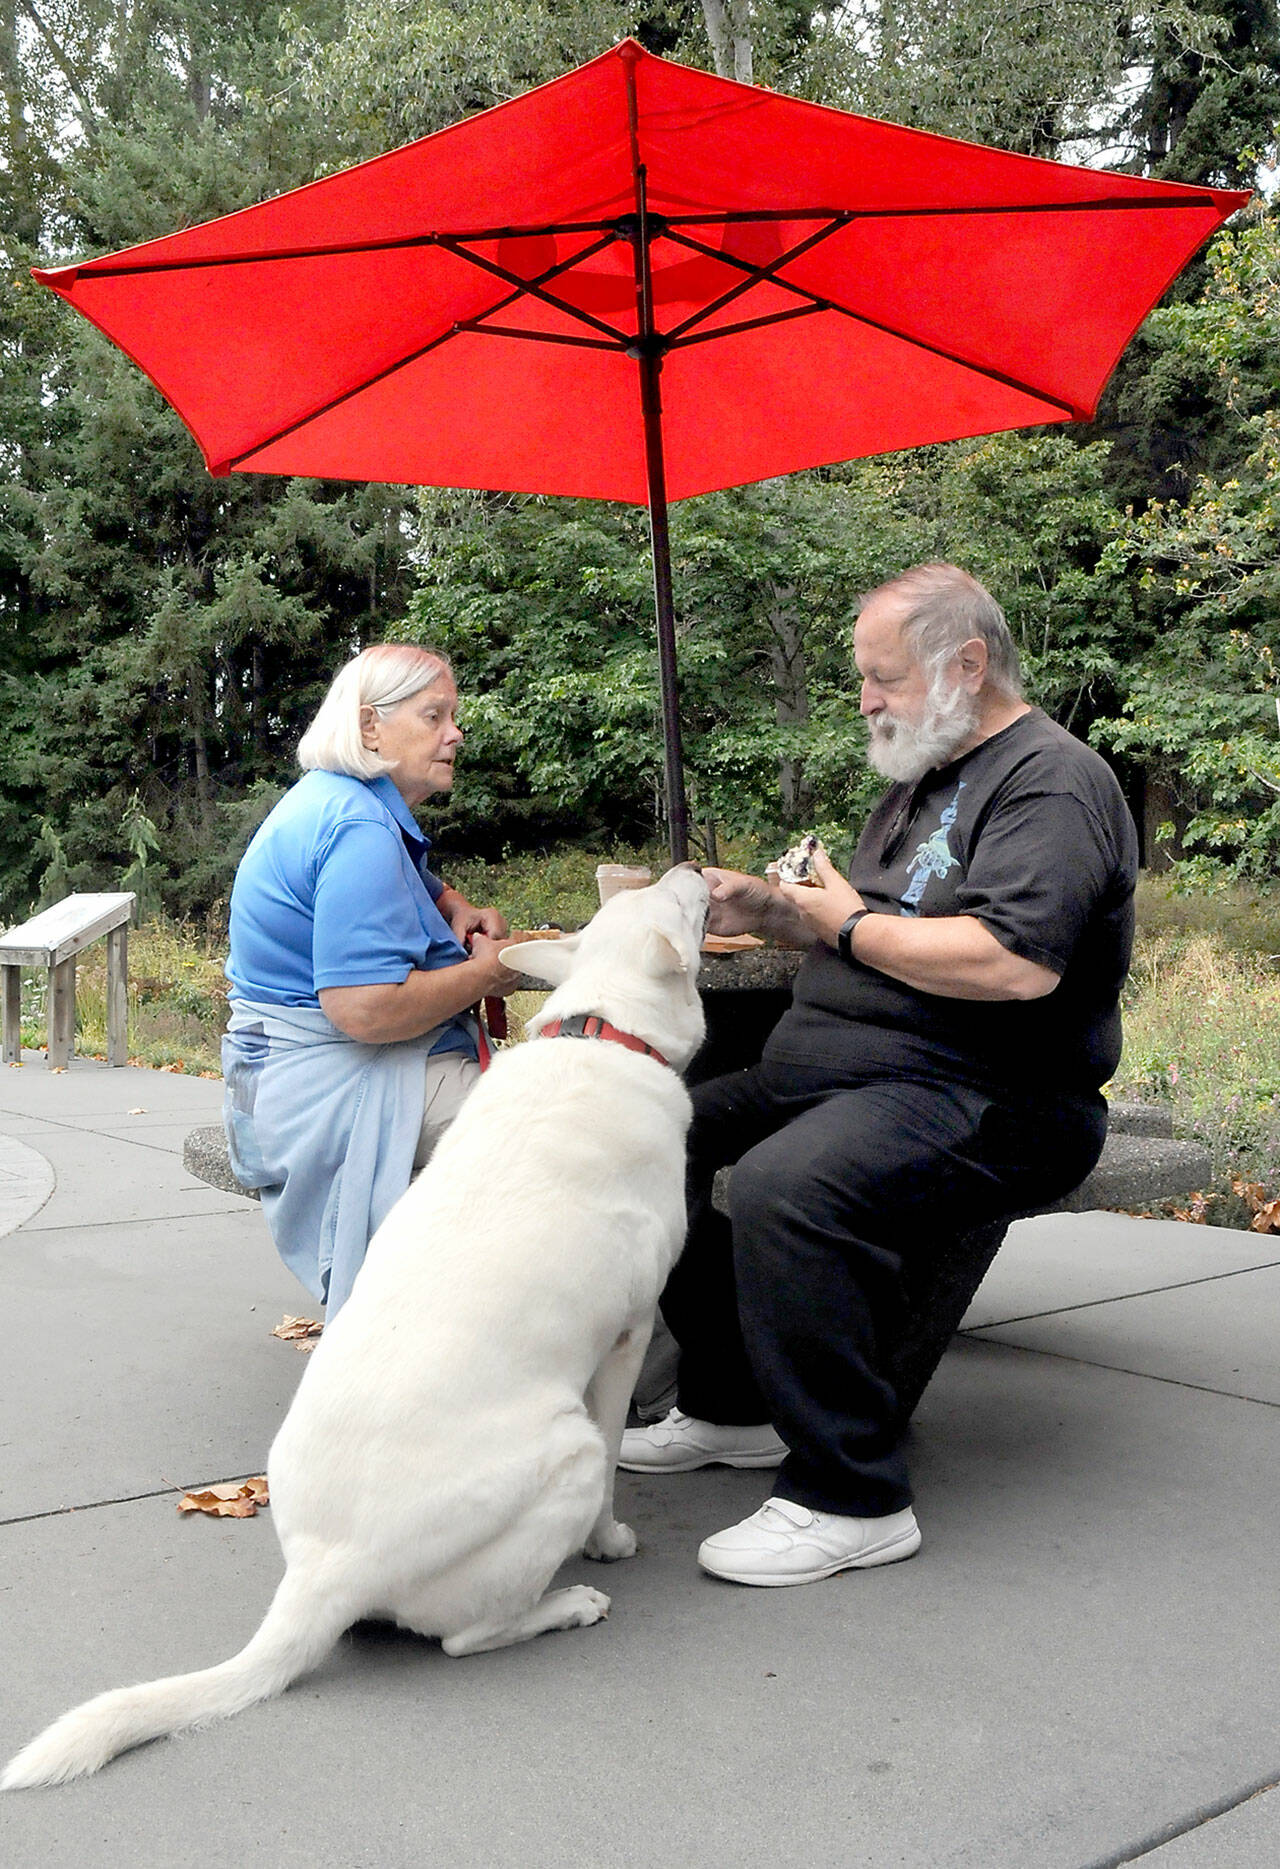 Lin Norris, left, watches as her husband George Norris feeds a tidbit to their rescued German shepherd, Storm King, on the patio of the Dungeness River Nature Center in Sequim.
The trio were on an outing to Railroad Bridge Park with a stop for coffee and snacks at the center. (KEITH THORPE/PENINSULA DAILY NEWS)